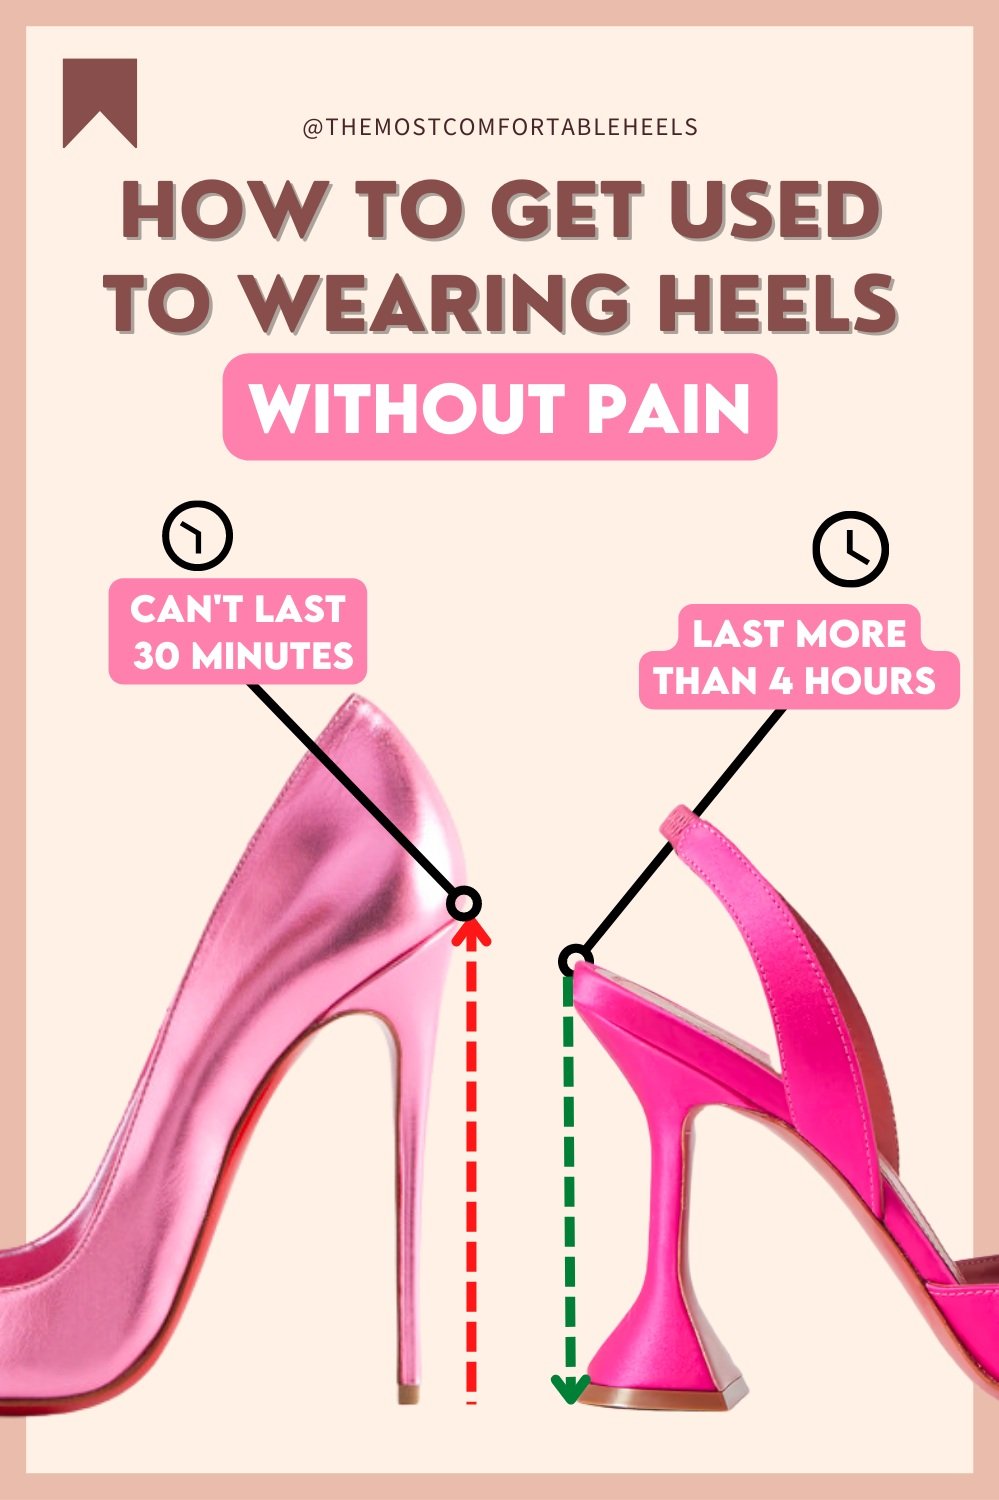 Top Five Reasons to Stop Wearing Heels - From Dr. Joanna Shuman